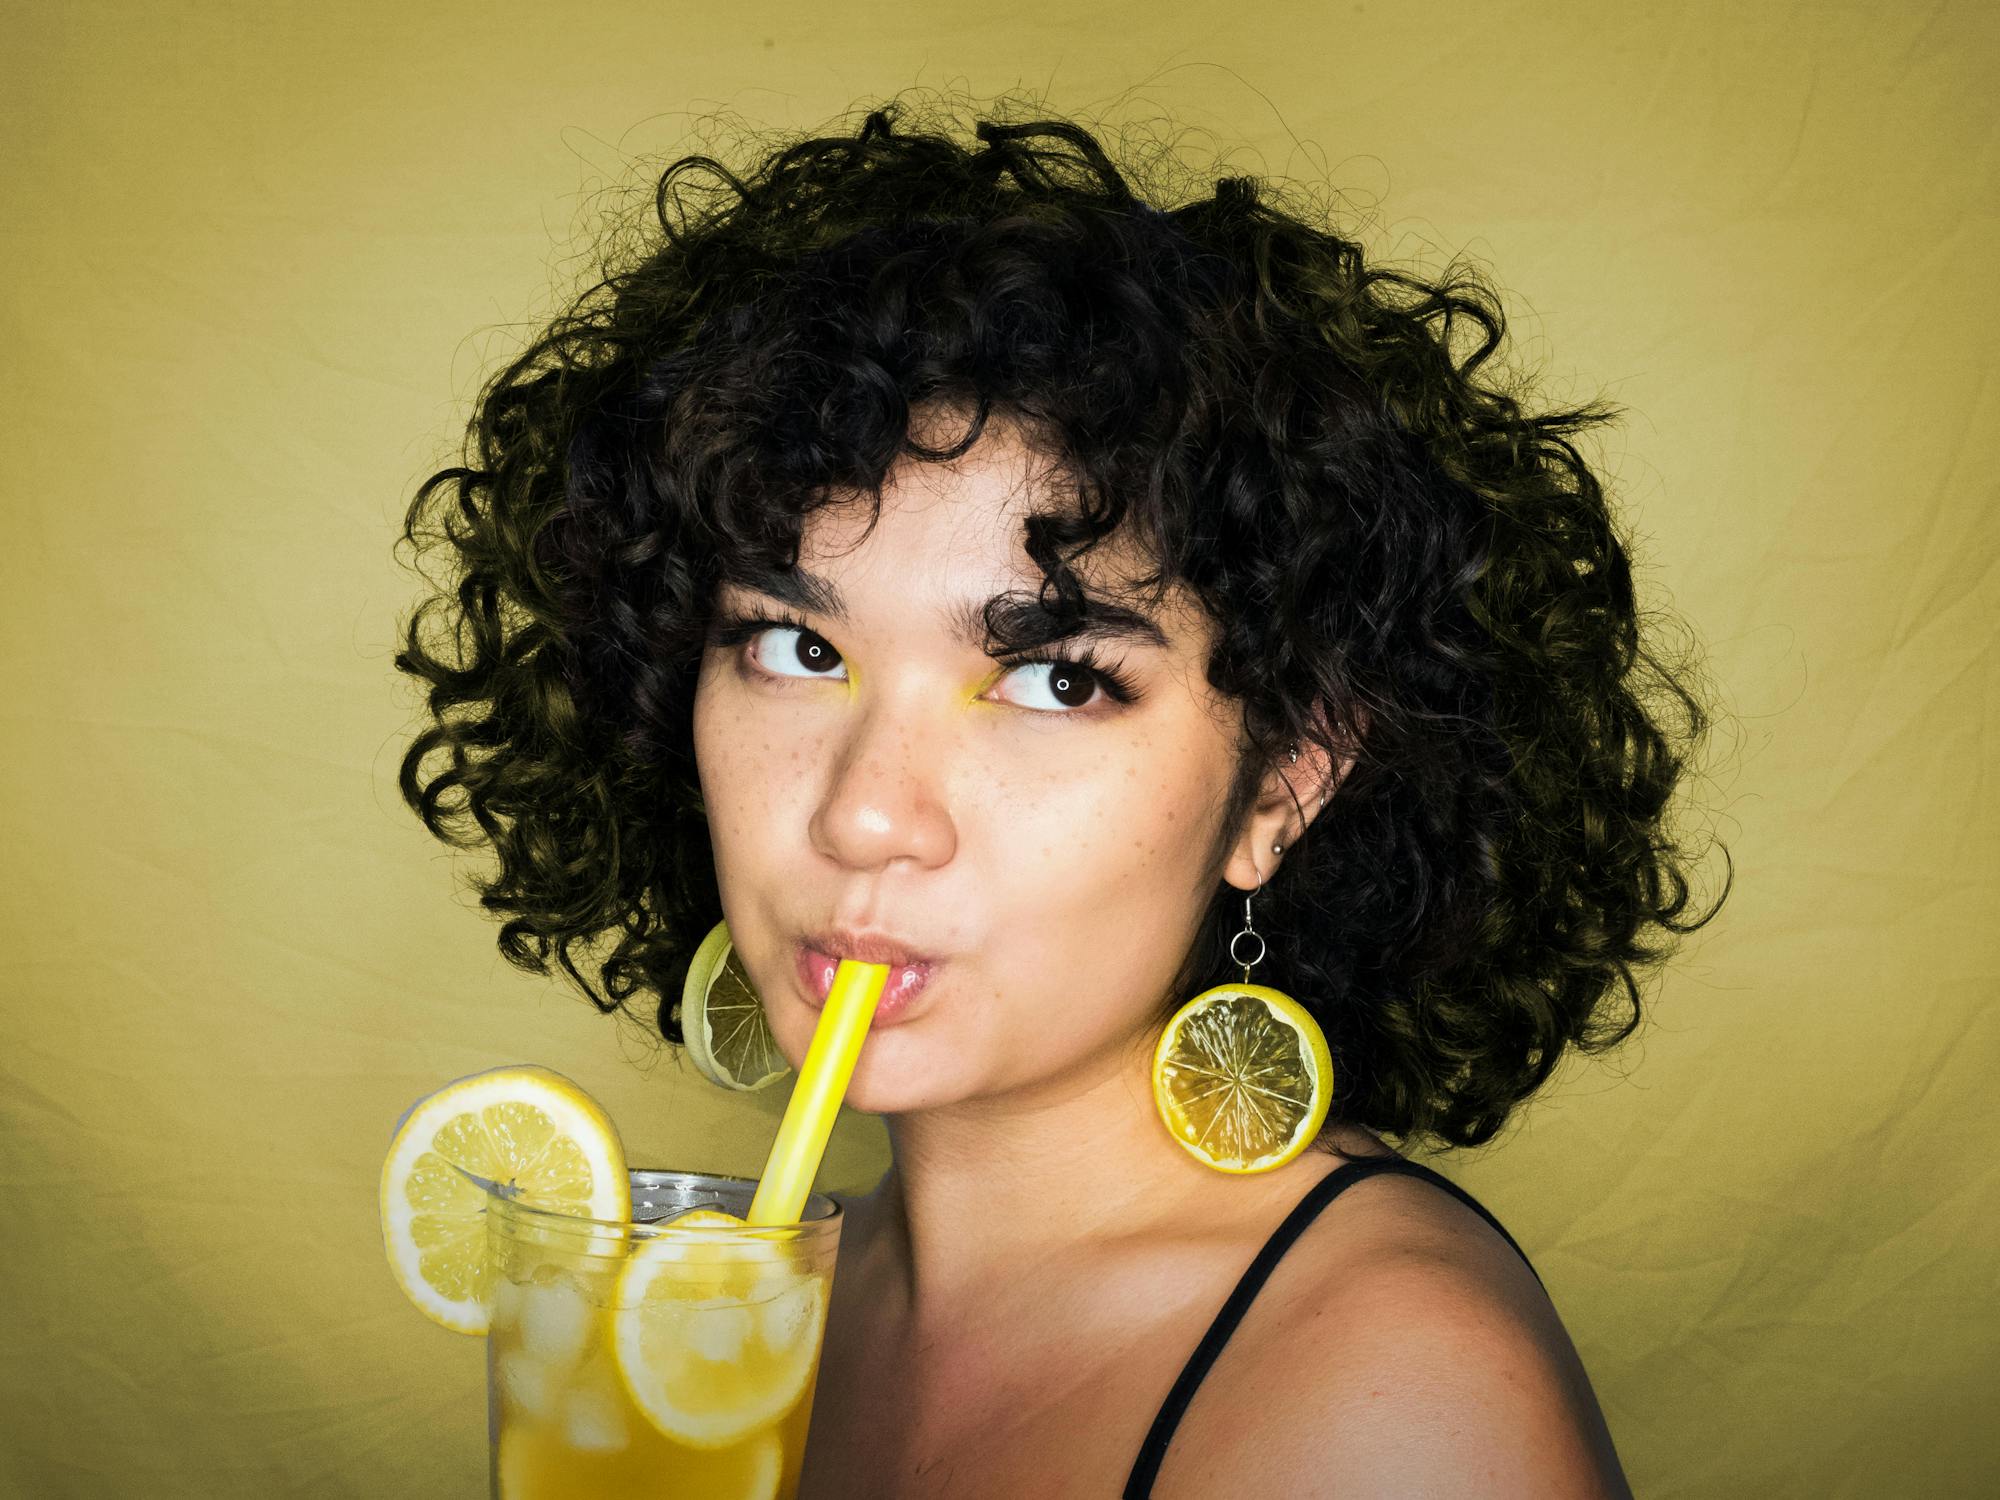 A young woman with curly hair stands in front of a yellow background with lemon-shaped earrings drinking lemonade